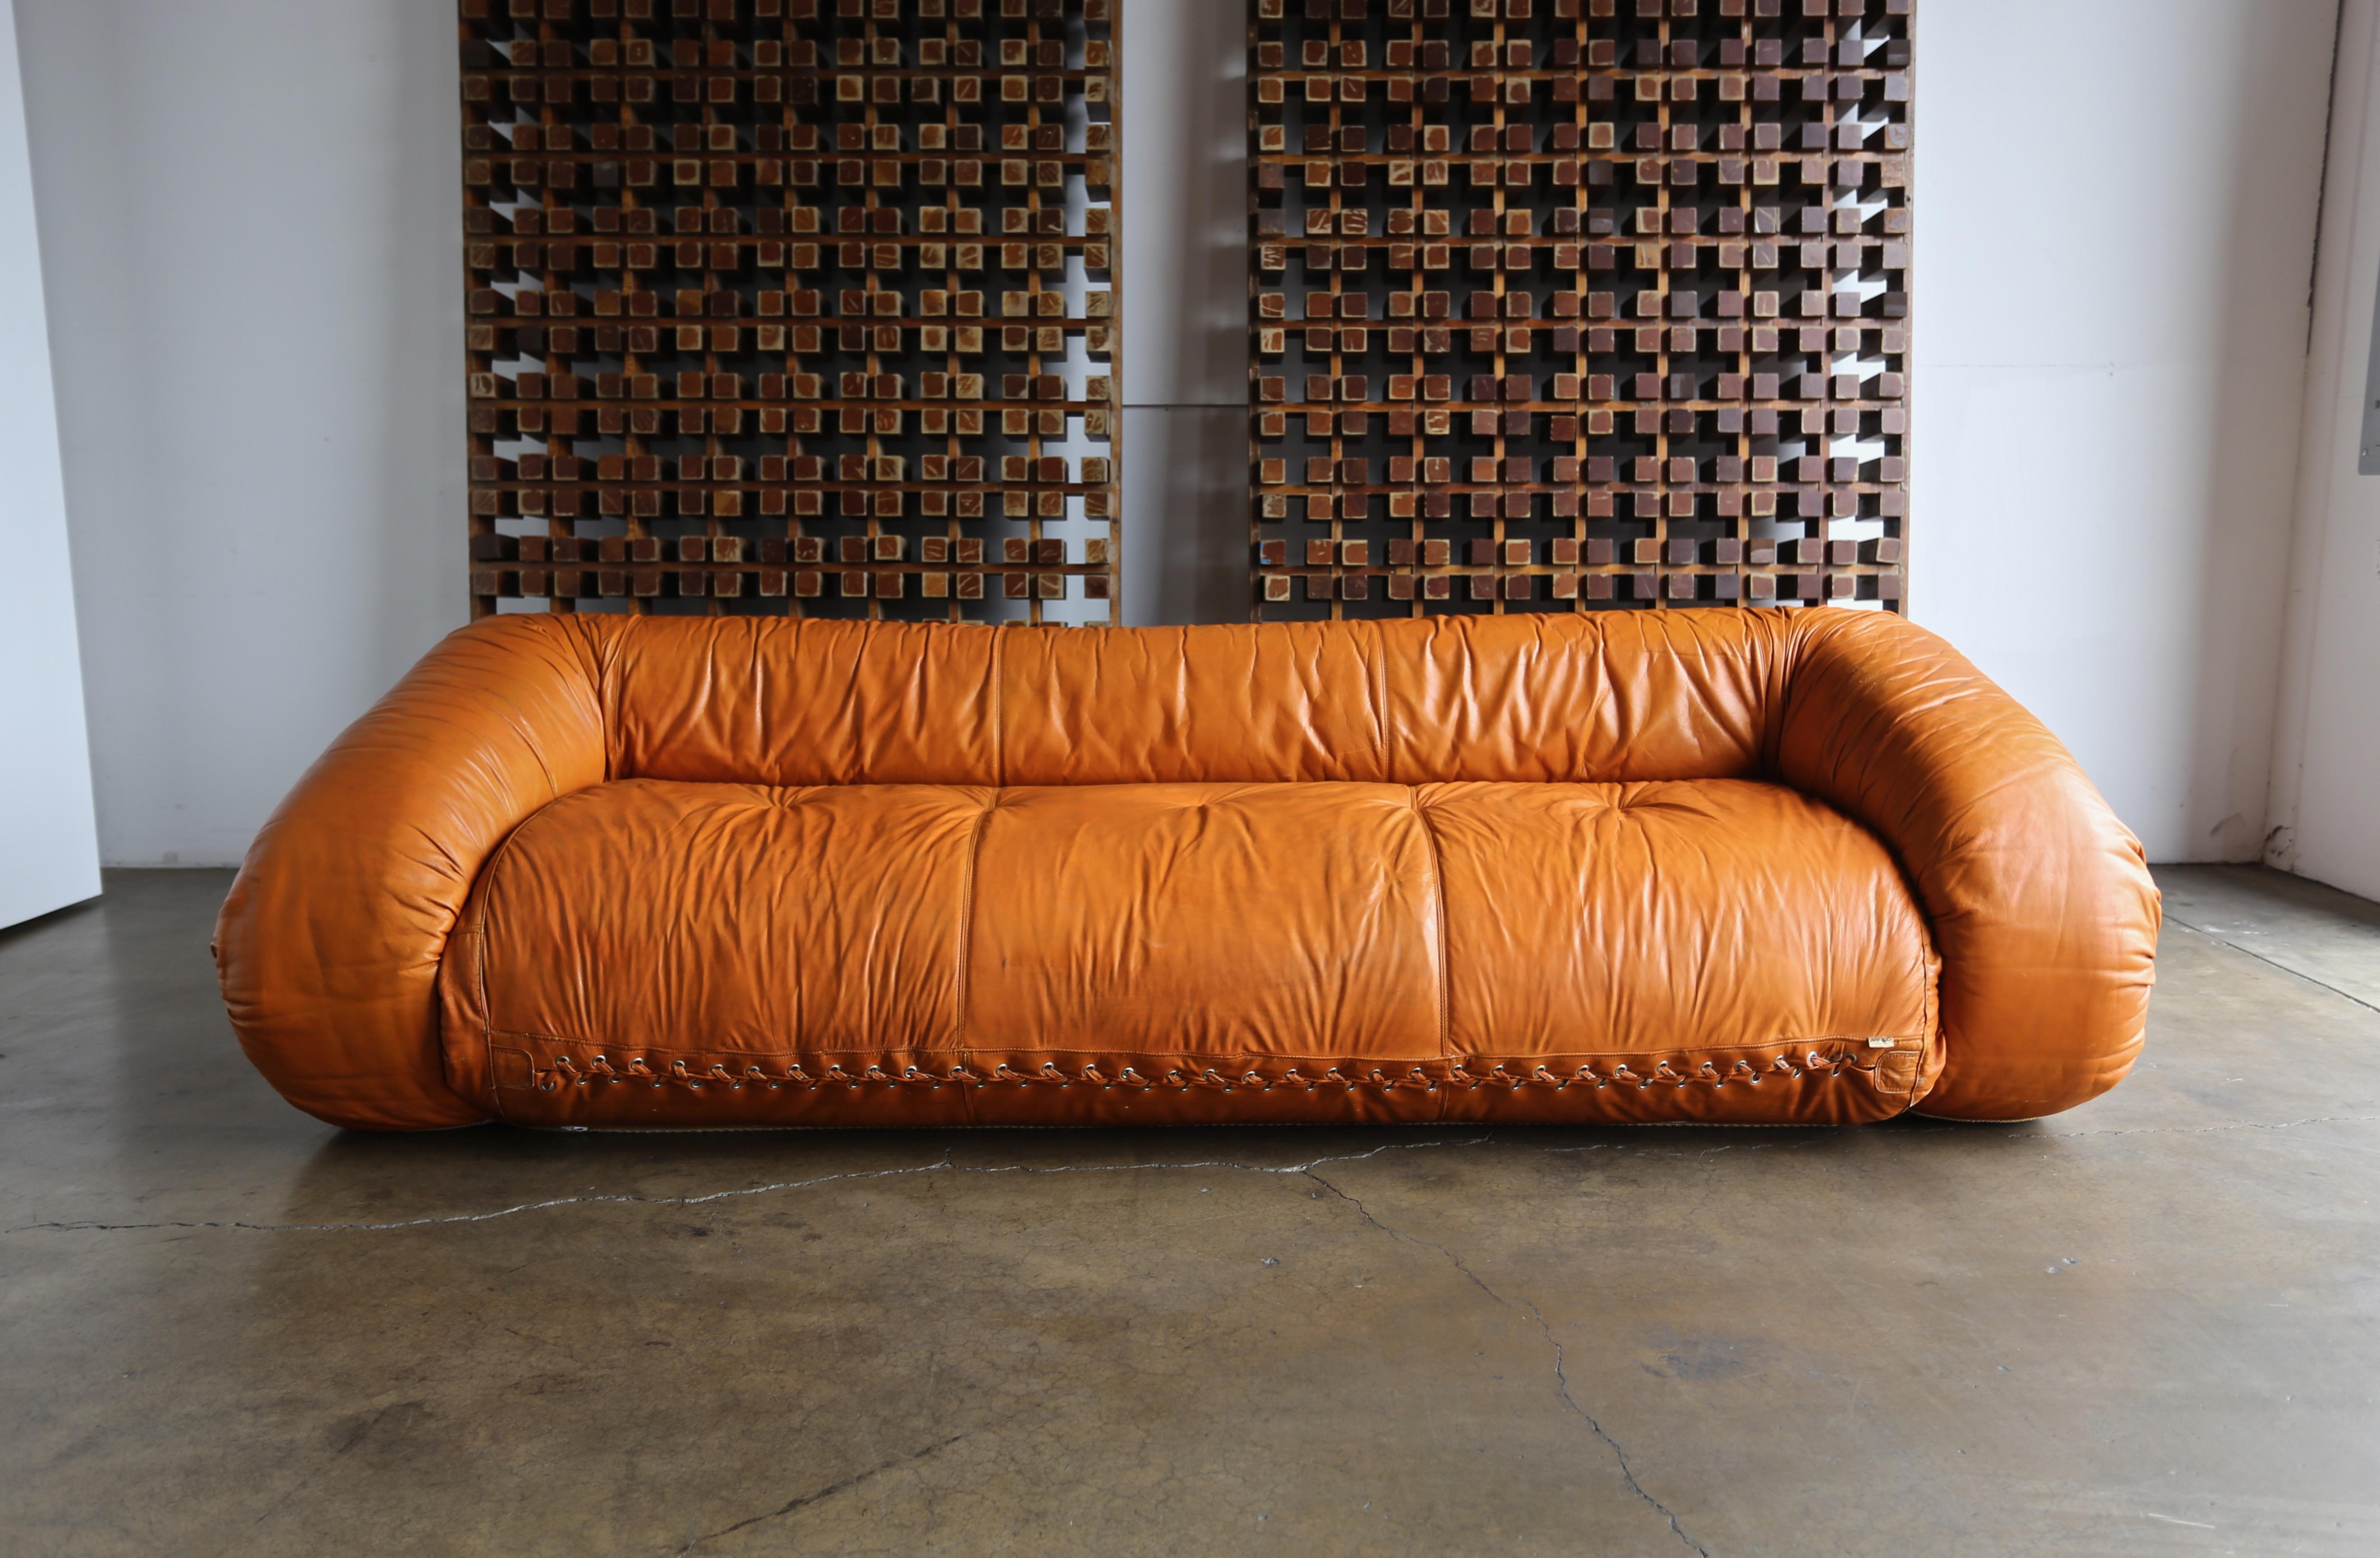 “Anfibio” sofa designed by Alessandro Becchi for Giovannetti, circa 1970. This piece converts into a bed.